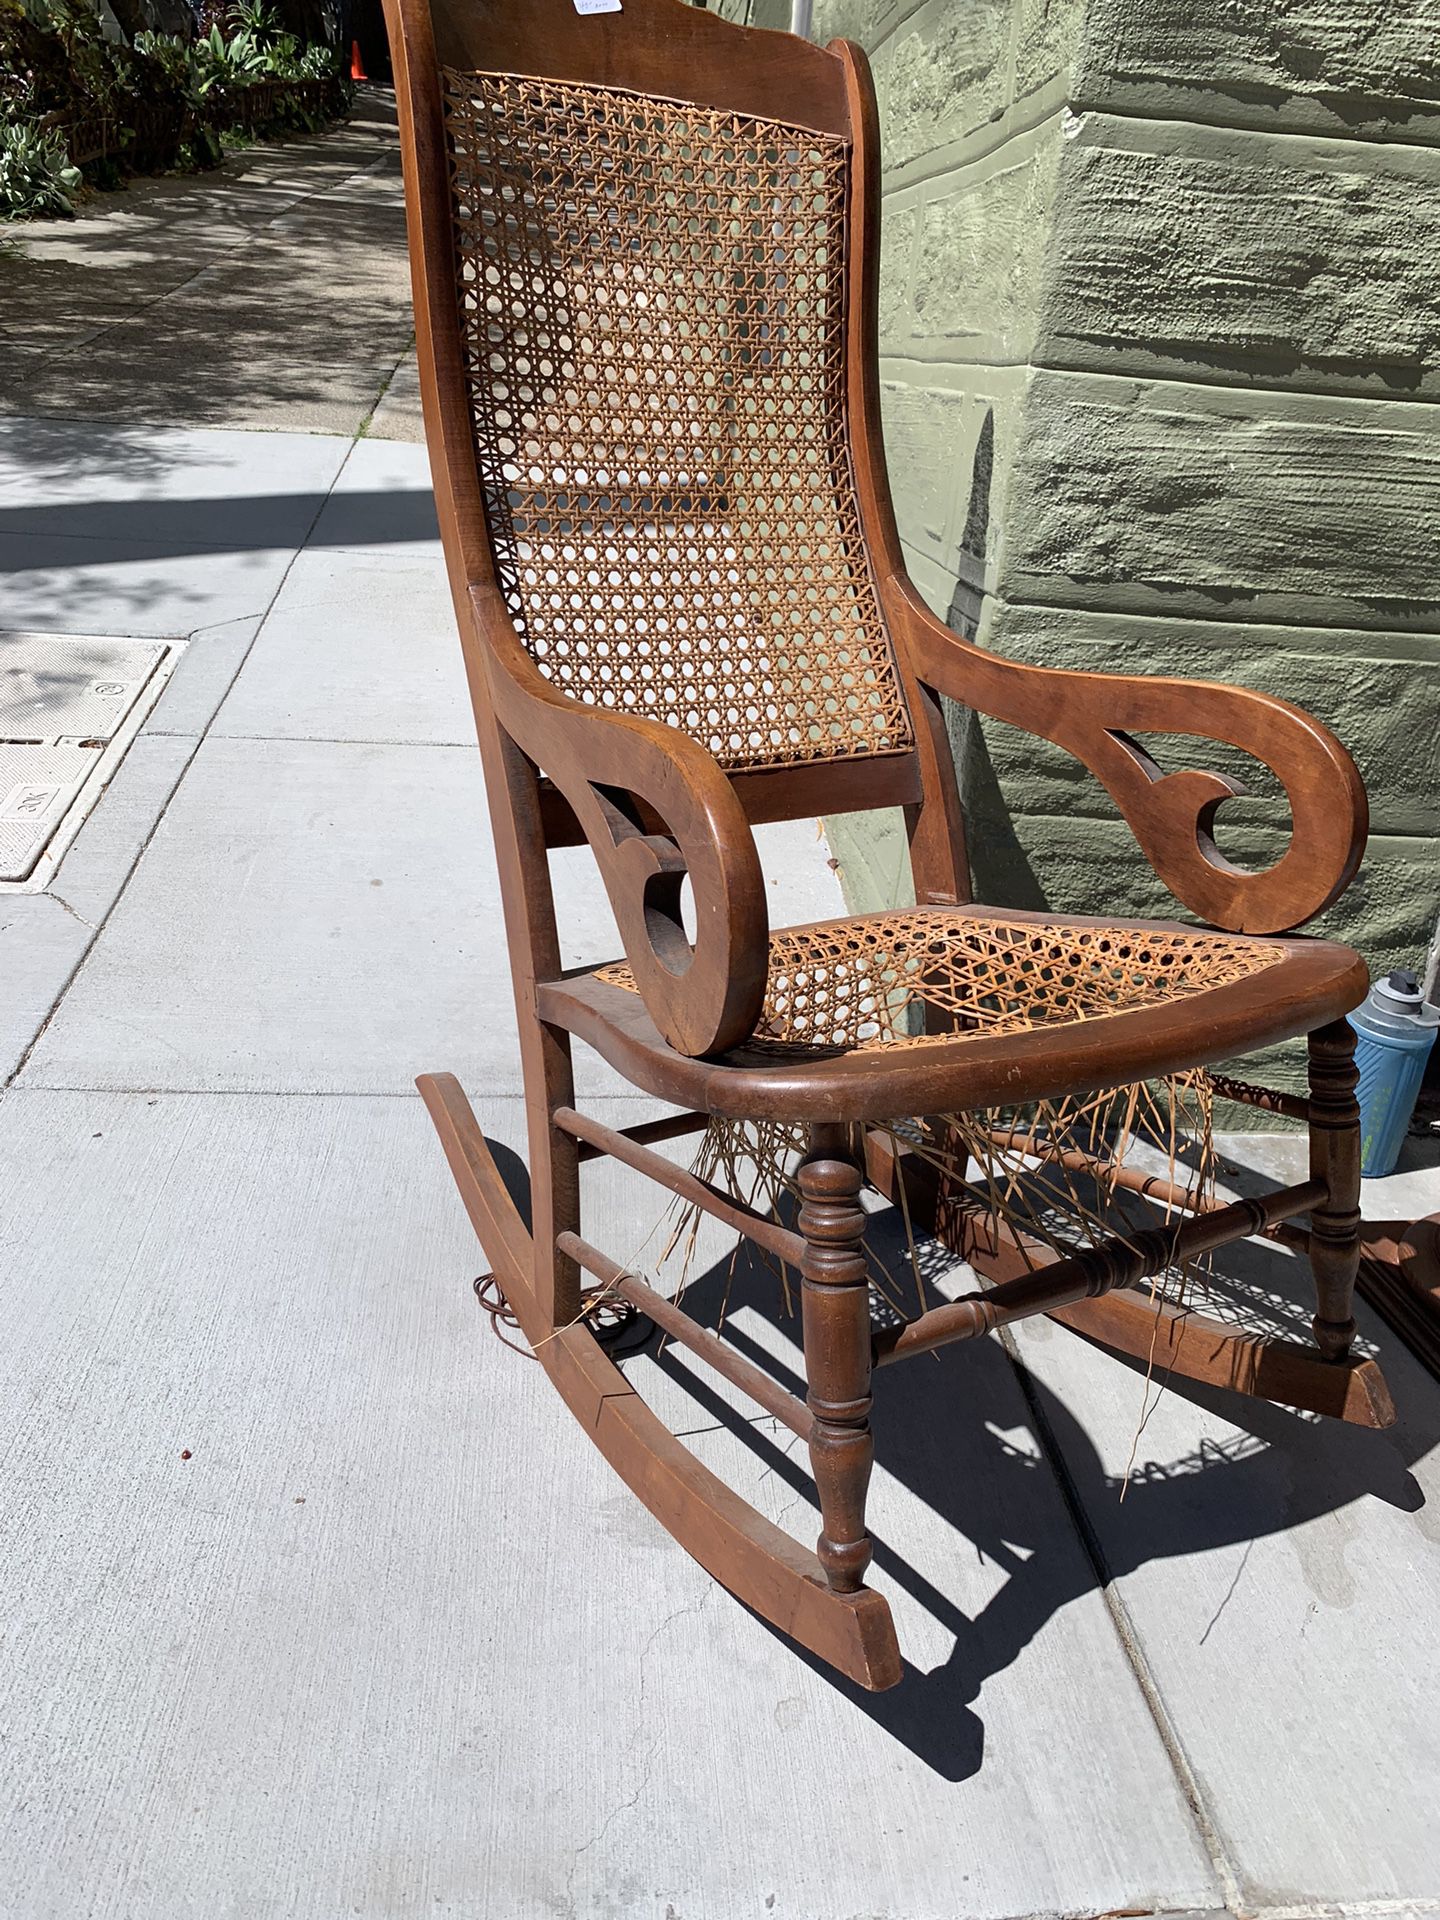 Antique Rocking Chair Caned. Need New Seat 